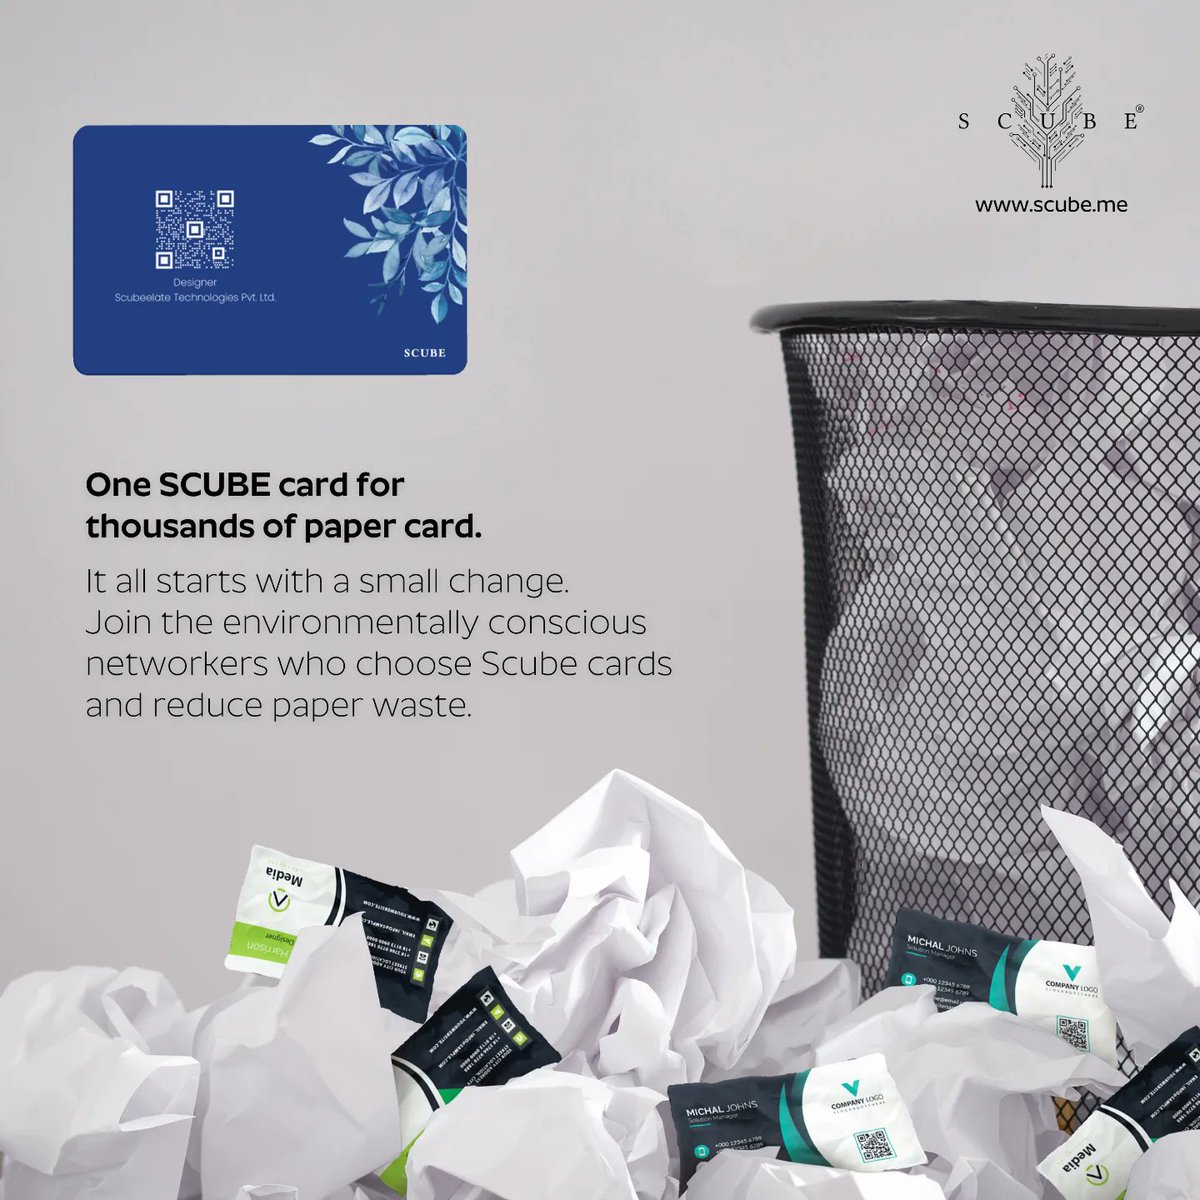 Upgrade your networking game with Scube cards - the future of business cards! Customize your Scube card and join the environmentally conscious networkers.
#ScubeCards #DigitalNetworking #CustomizableDesigns #PaperlessSolutions #EnvironmentalSustainability #ModernProfessionals